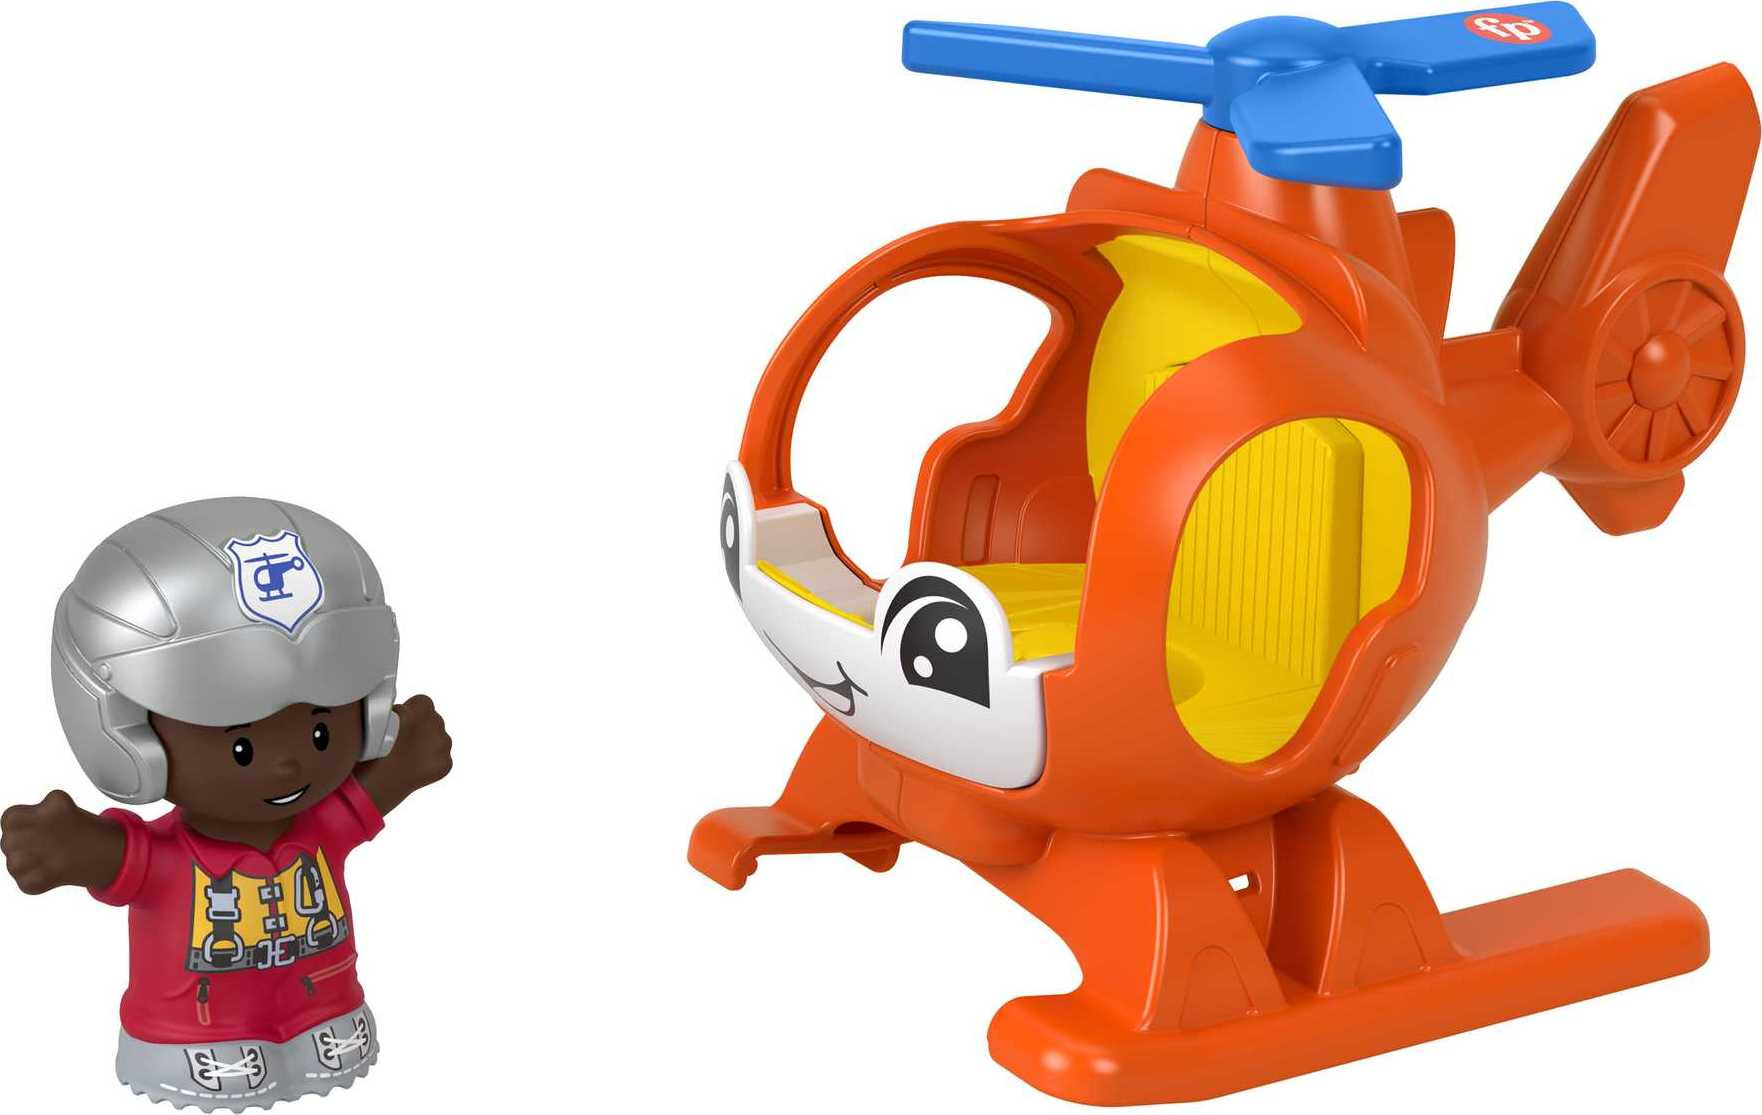 Fisher-Price Little People Helicopter Toy & Pilot Figure Set for Toddlers, 2 Pieces - image 1 of 6